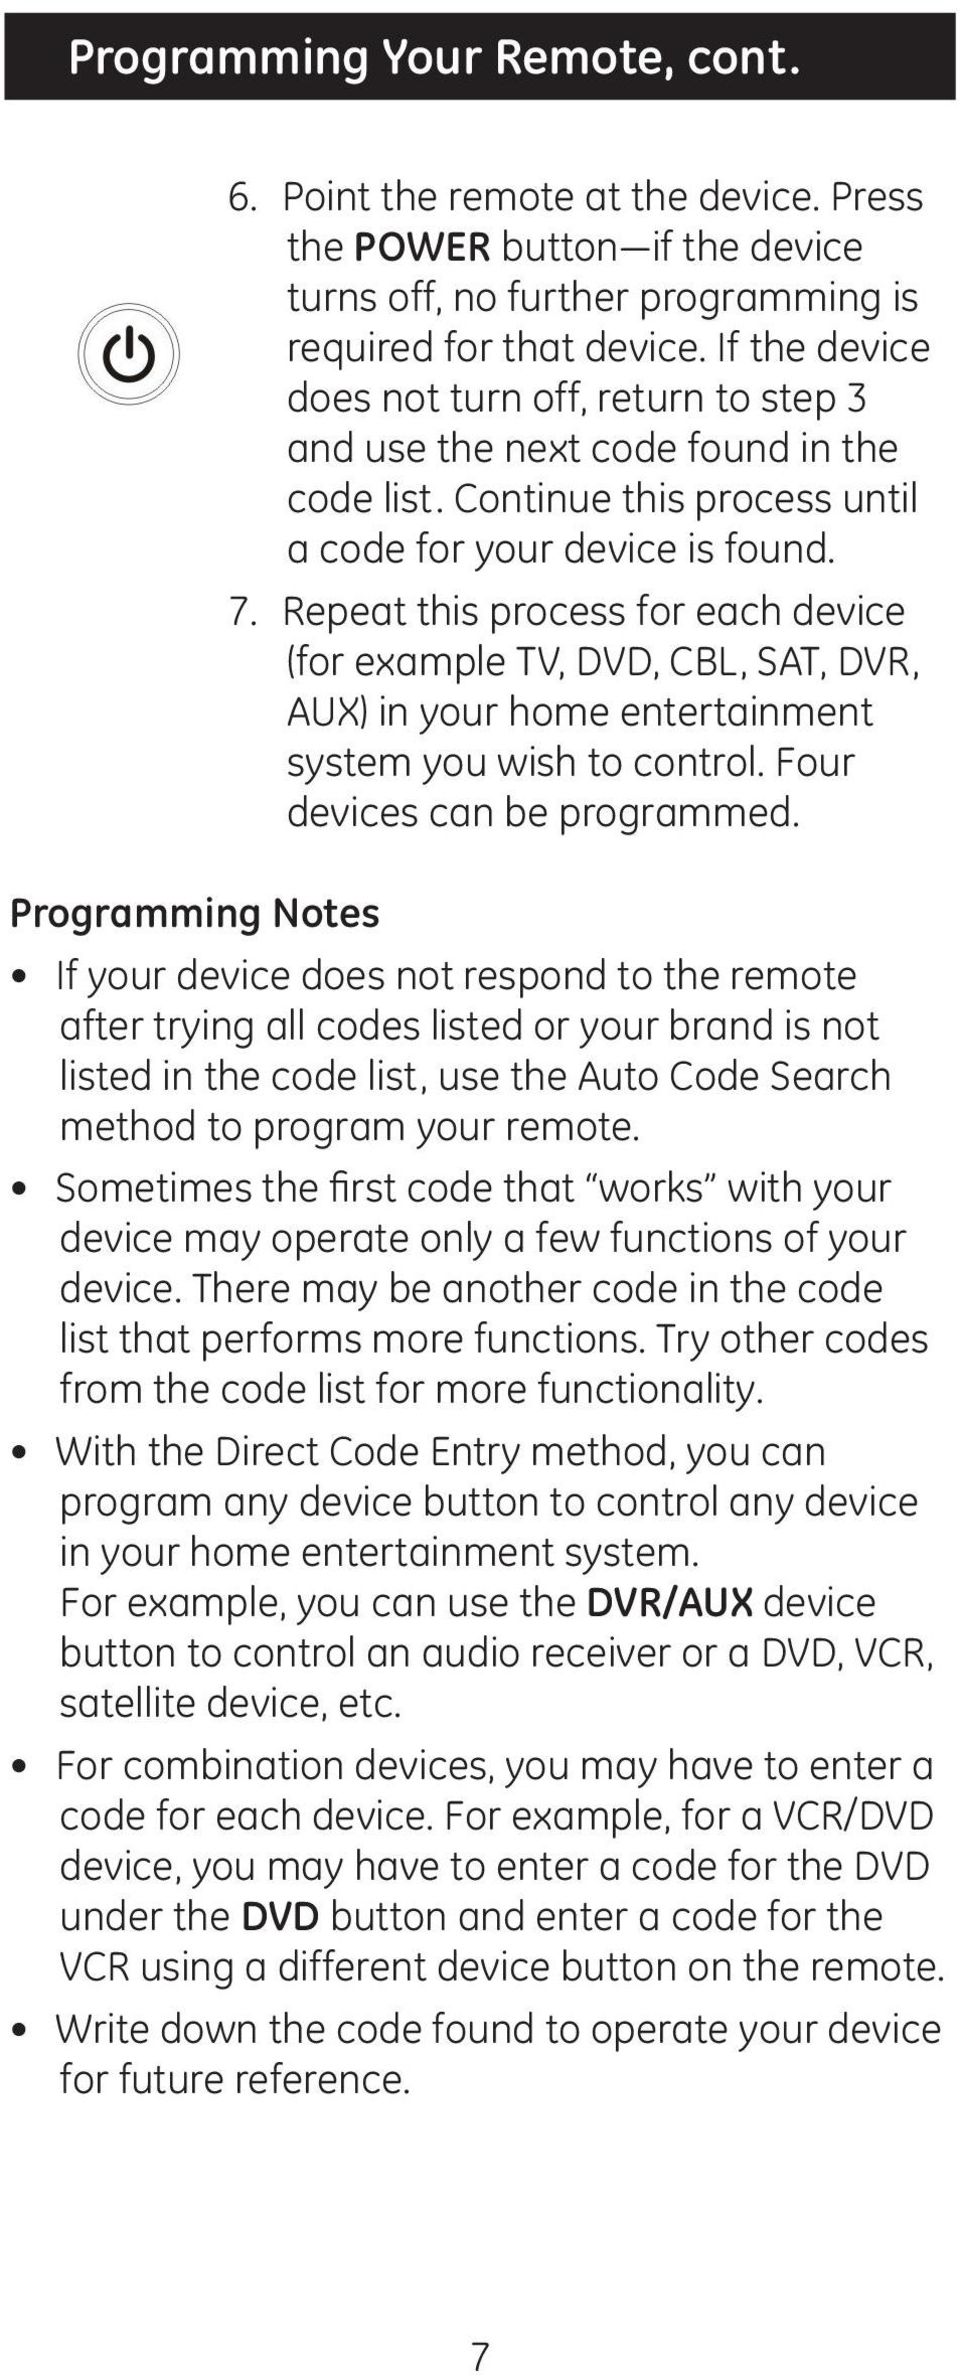 Repeat this process for each device (for example TV, DVD, CBL, SAT, DVR, AUX) in your home entertainment system you wish to control. Four devices can be programmed.